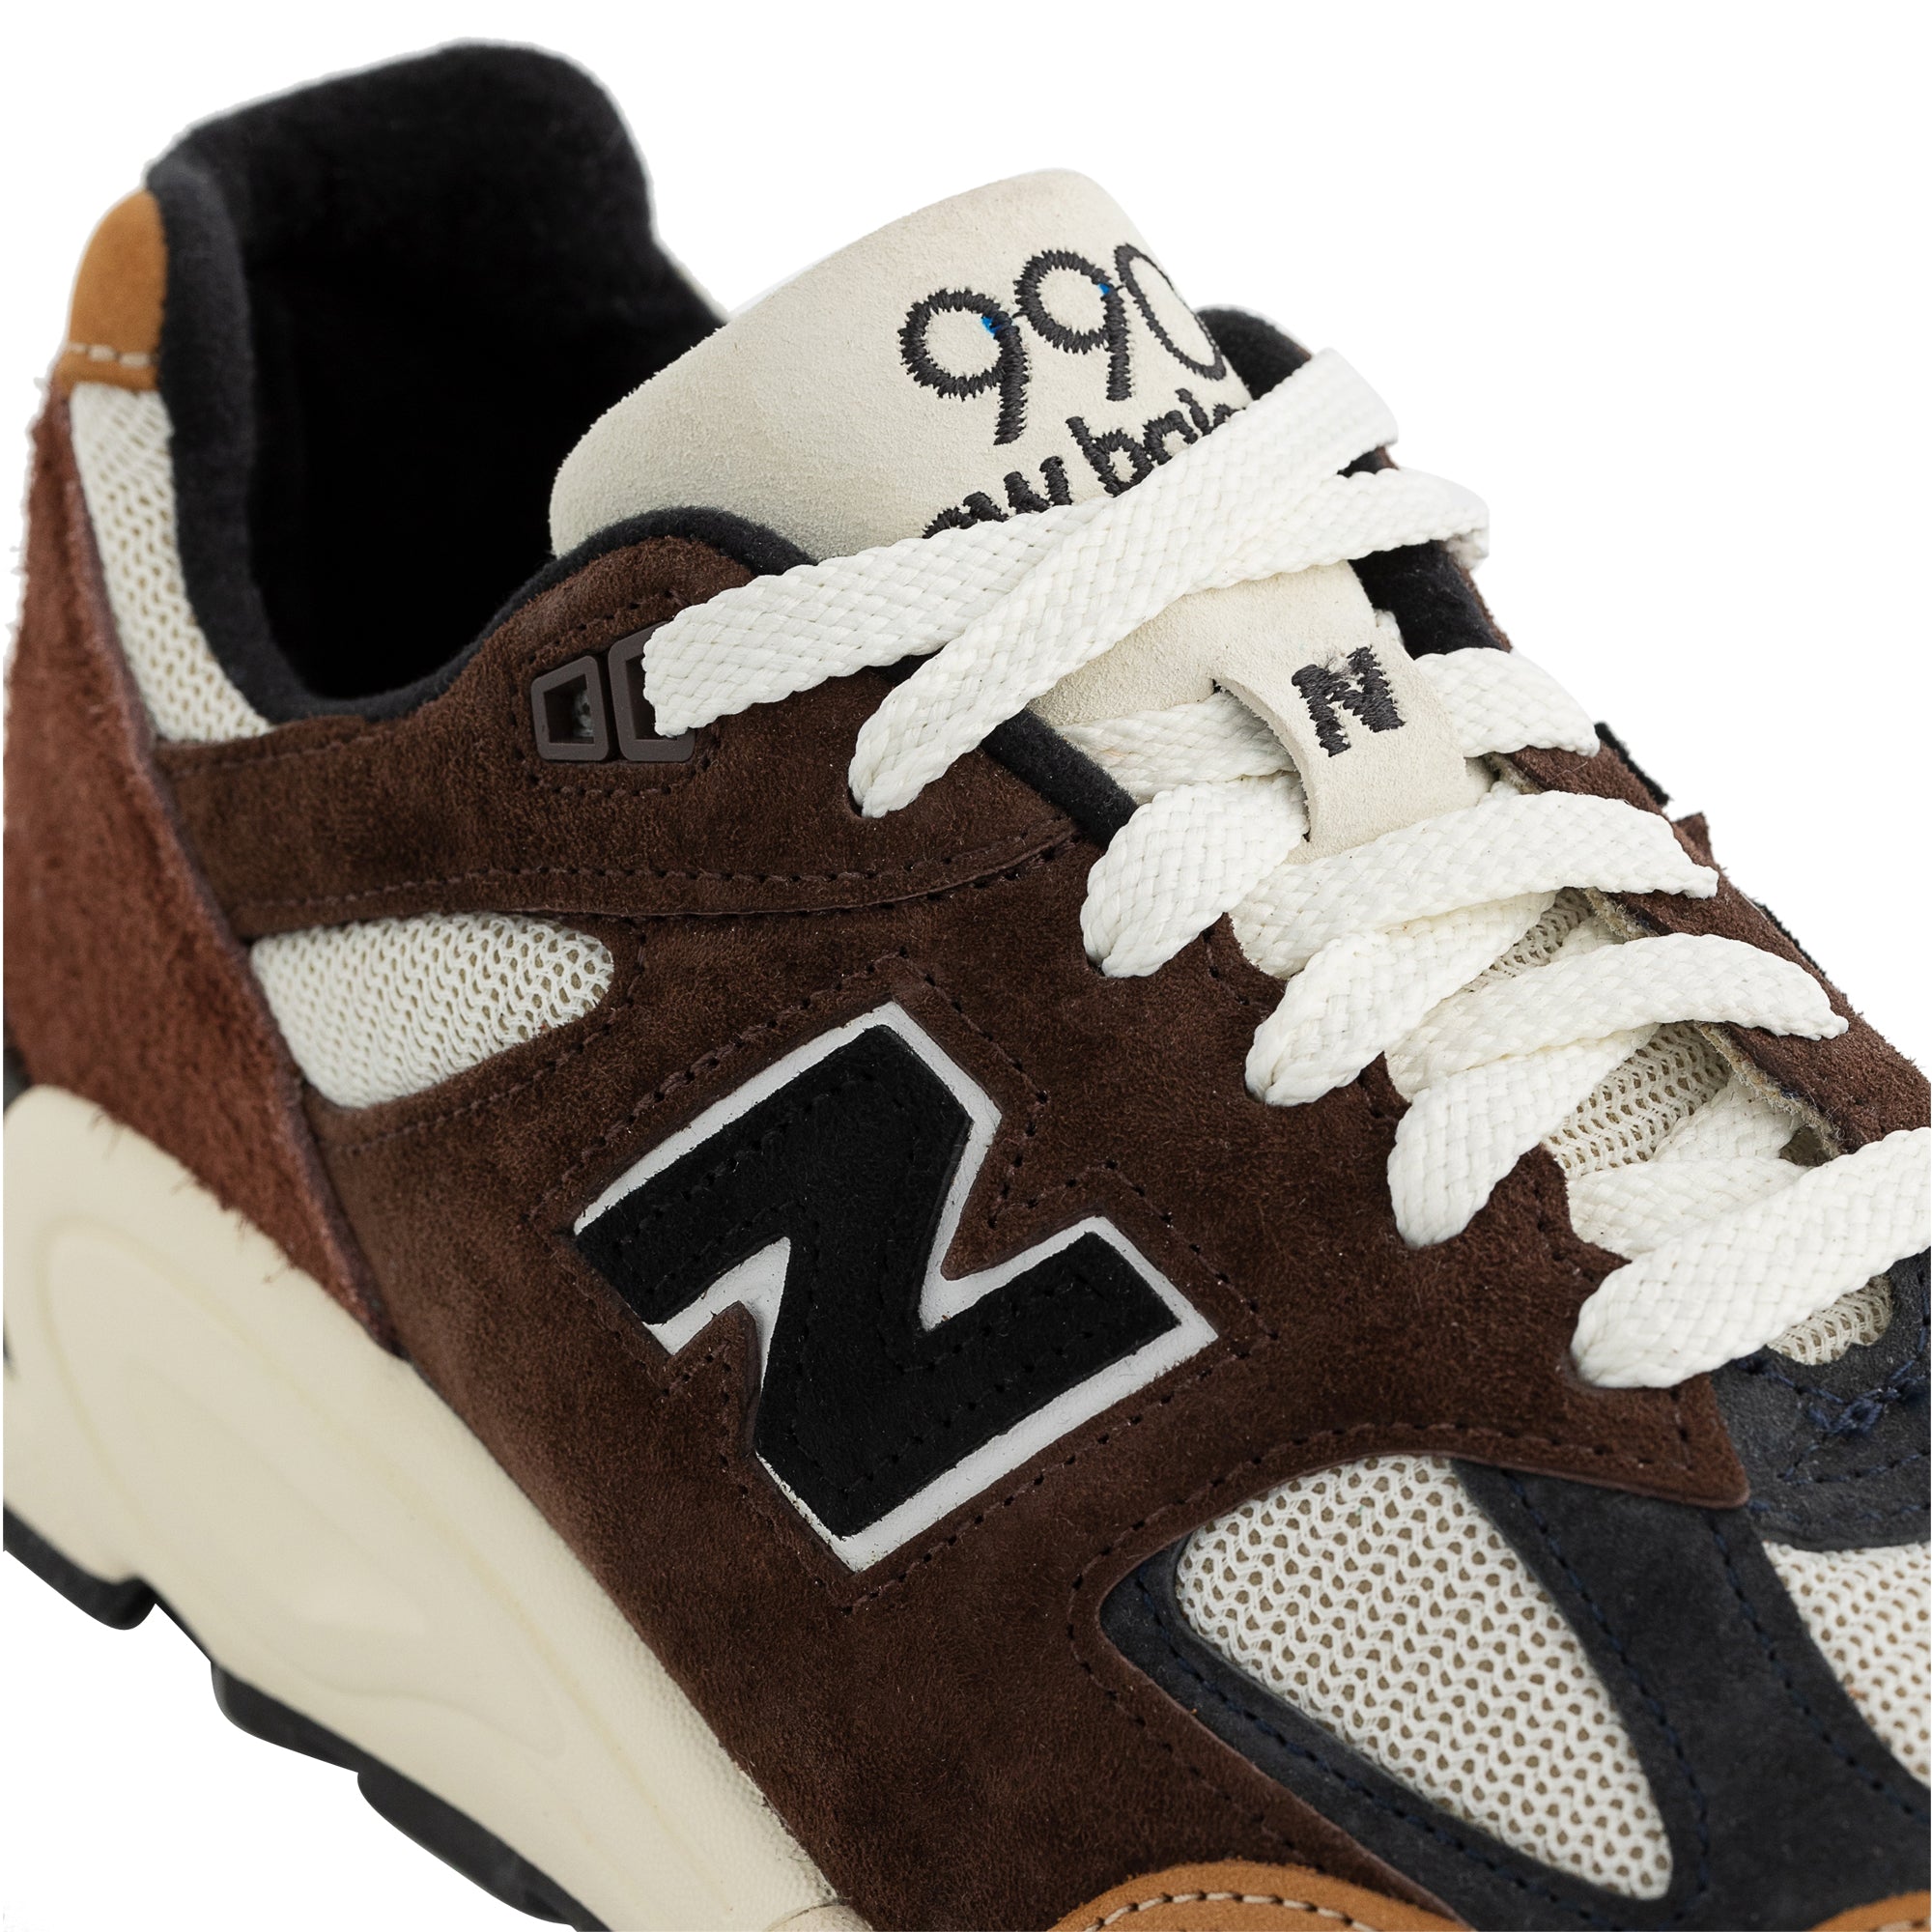 New Balance Made In USA 990v2 Shoes - 8.5